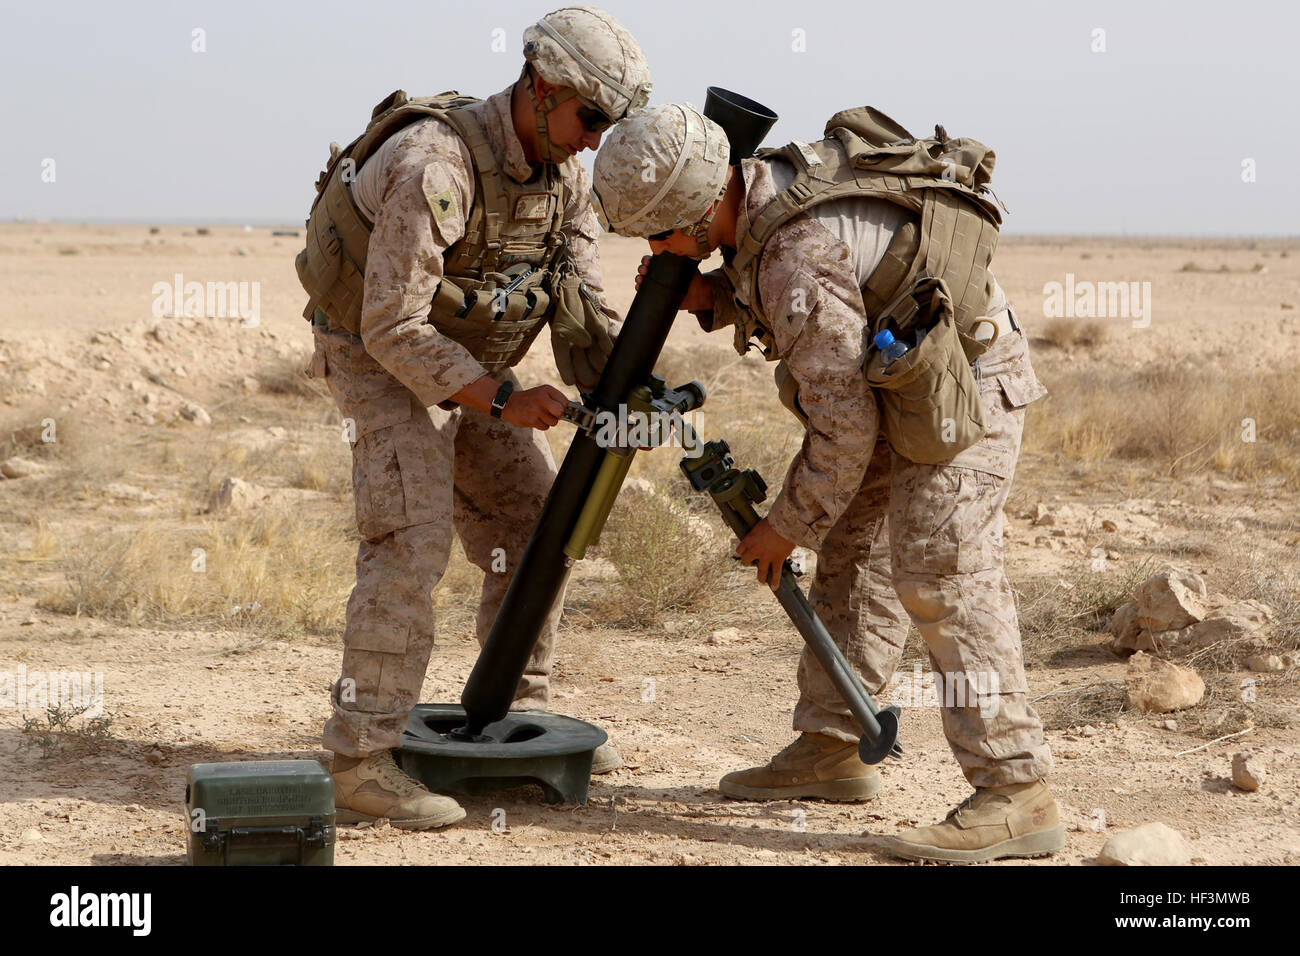 U.S. Marines with Weapons Company, 1st Battalion, 7th Marine Regiment, Special Purpose Marine Air-Ground Task Force--Crisis Response--Central Command, assemble a new M252A2 81mm mortar system during a live-fire training mission at Al Asad Air Base, Iraq, Oct. 24, 2015. The training allowed the Marines to build their proficiency with the new weapons system.  This unit is supporting the Combined Joint Task Force – Operation Inherent Resolve, which is a coalition of regional and international nations who have joined together to defeat the Islamic State of Iraq and the Levant and the threat they p Stock Photo